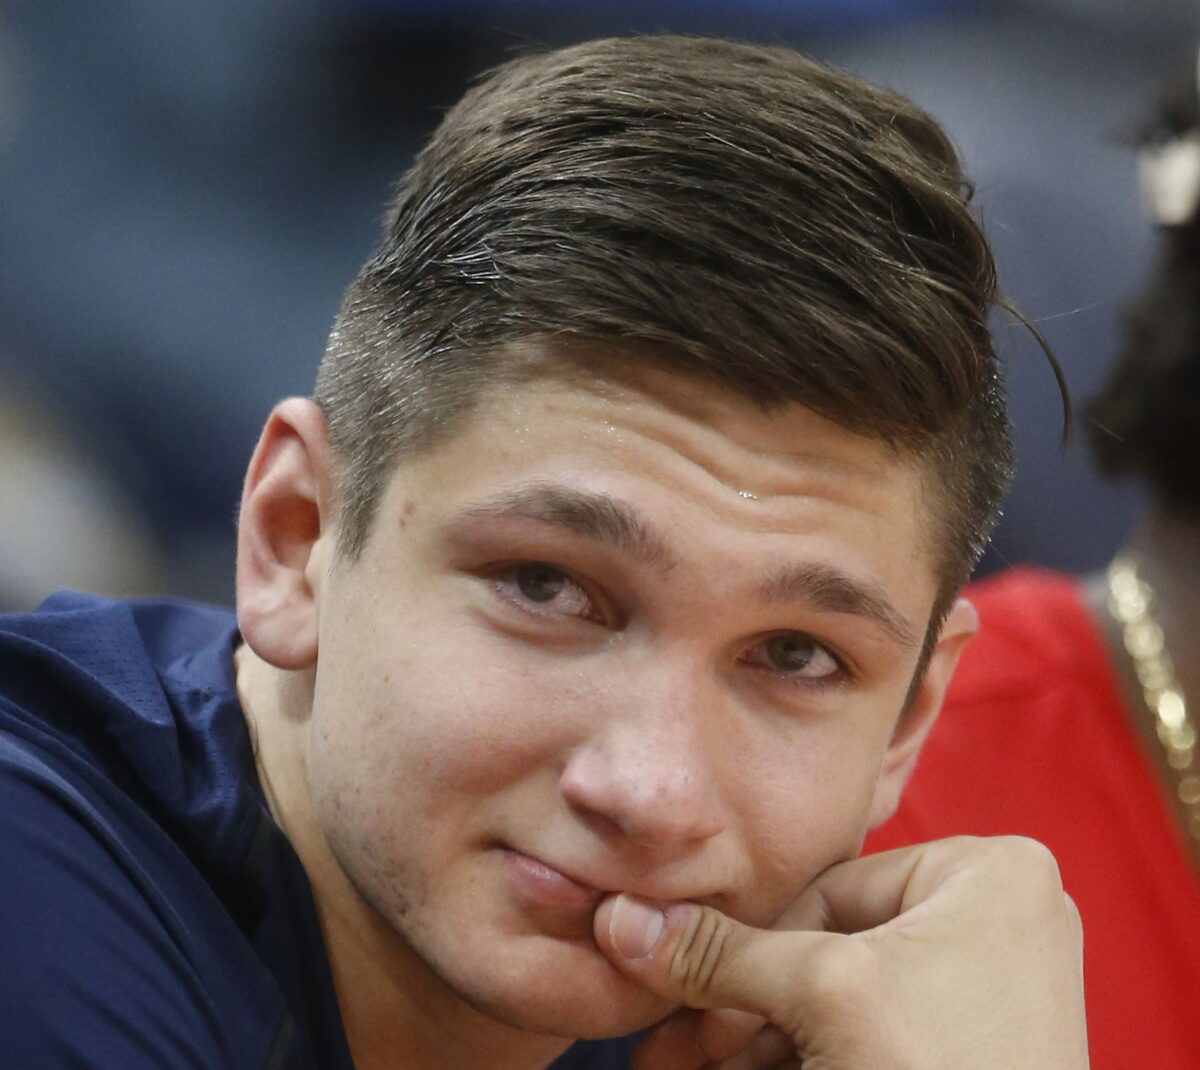 A short history of Grayson Allen playing dirty after yet another incident